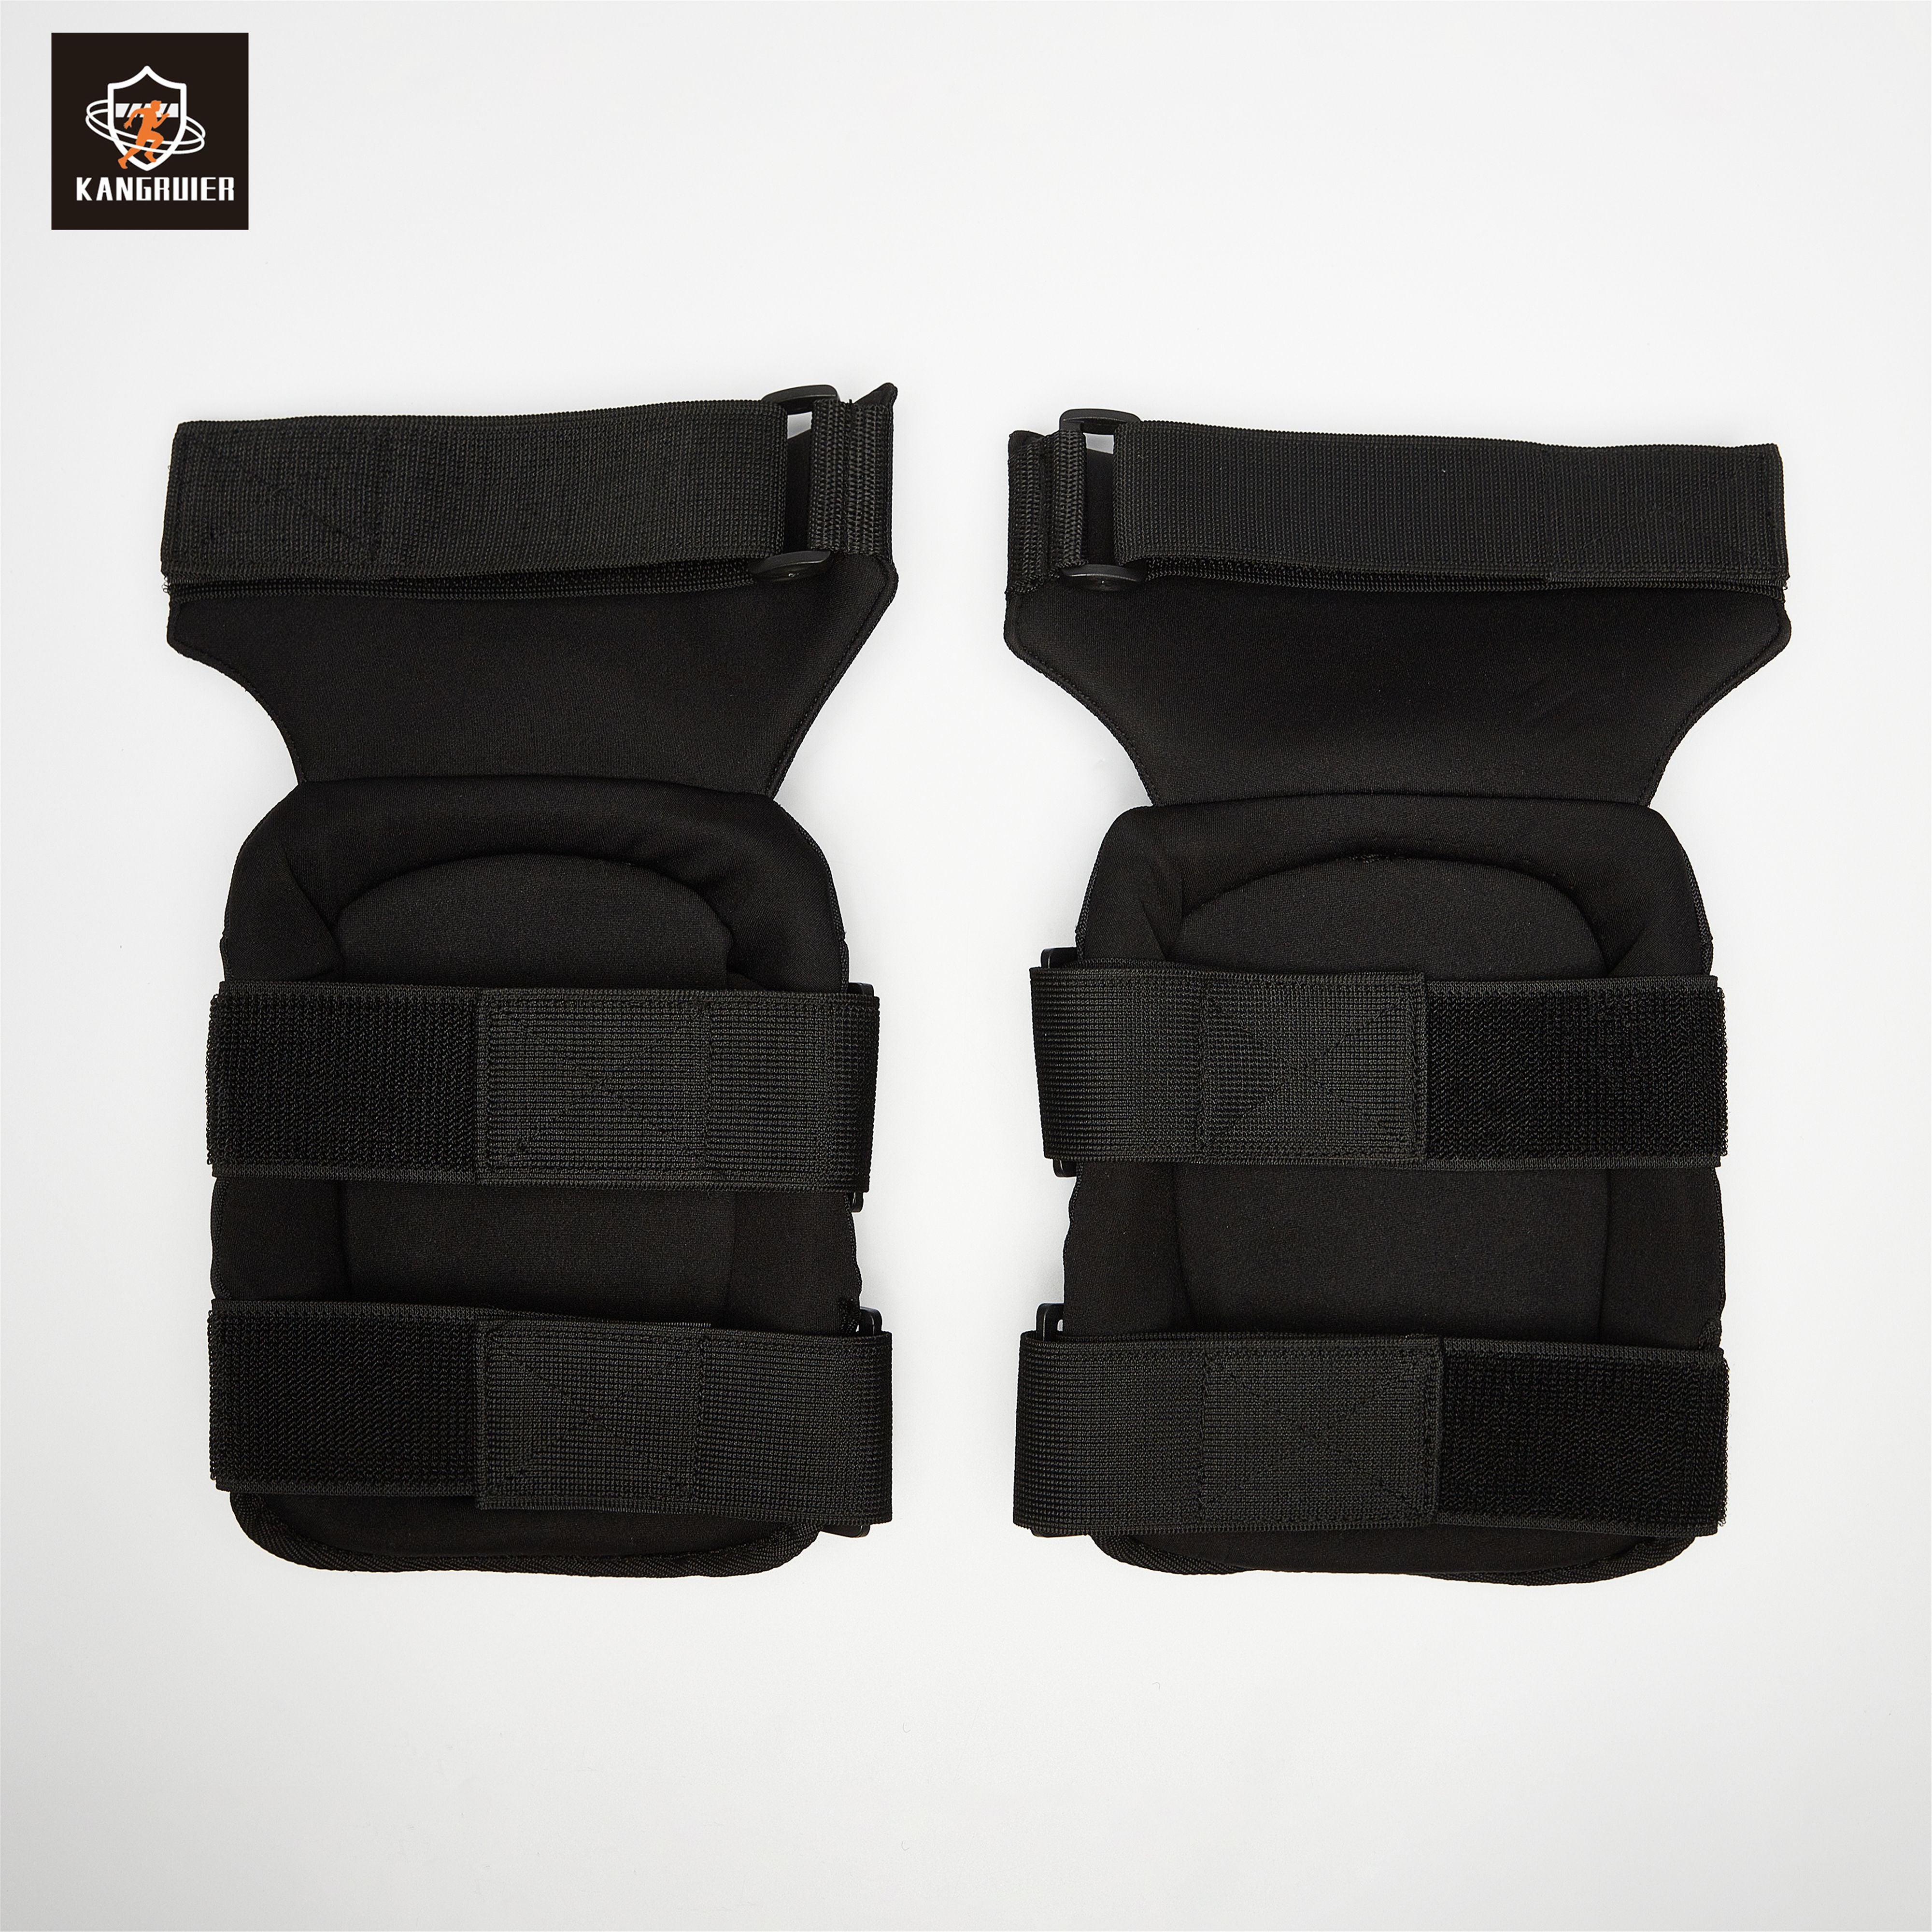 Knee Pads for Work Protection, Gardening, Cleaning,Construction, Flooring, Thick Foam Cushion